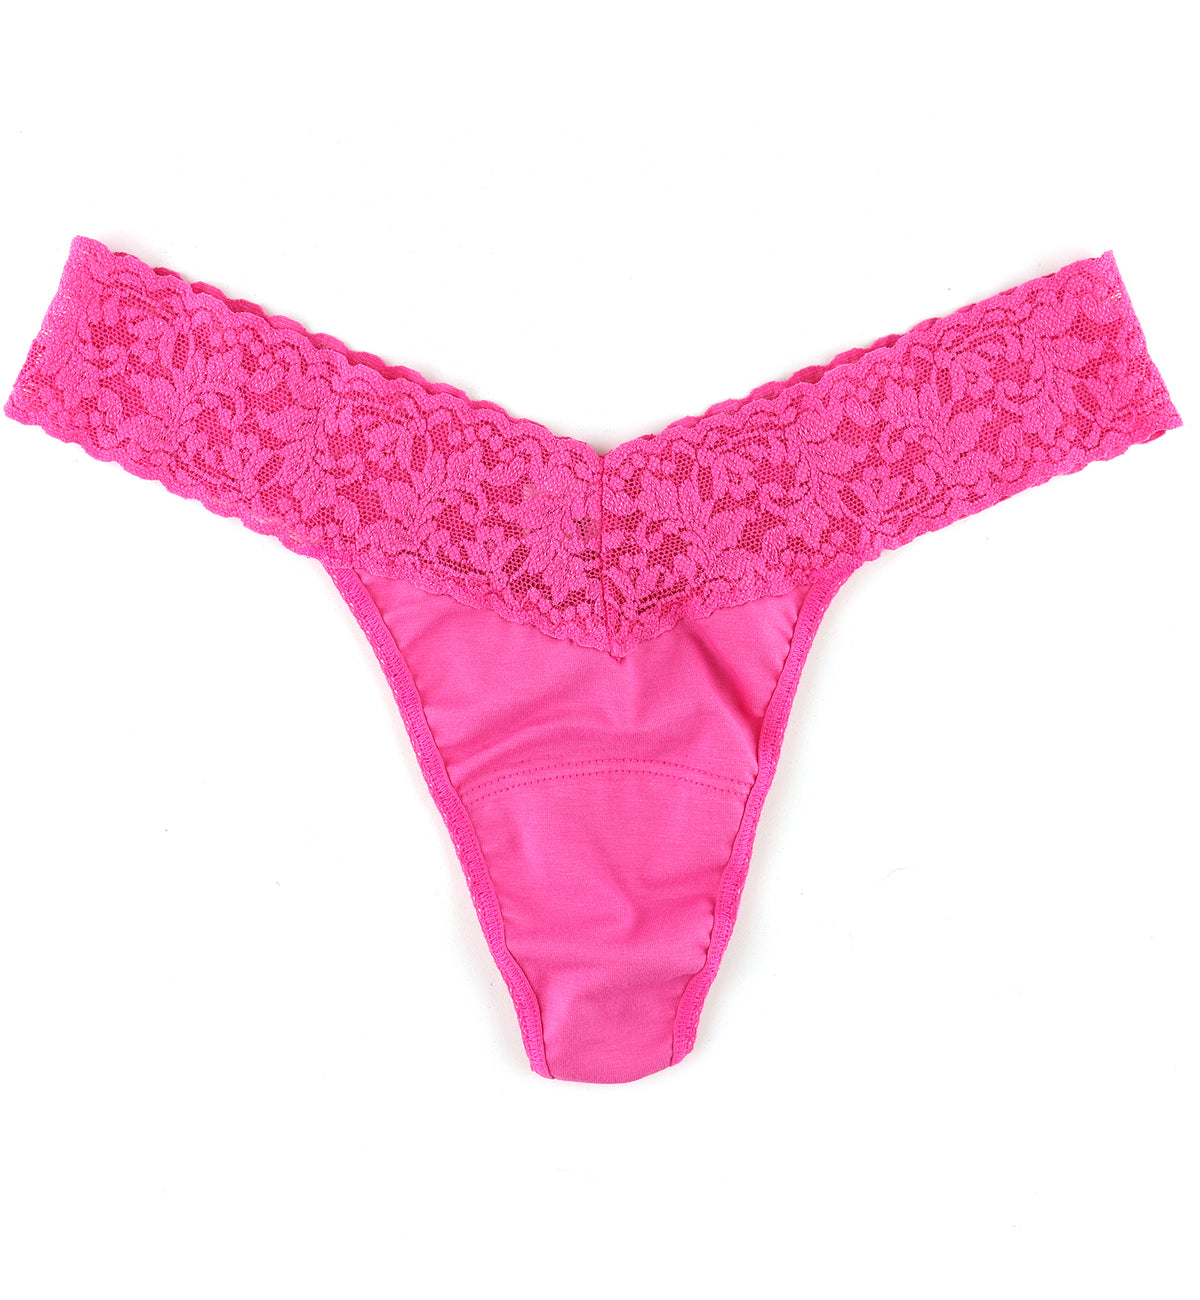 Hanky Panky Cotton Low Rise Thong (891581),Wild Pink - Wild Pink,One Size